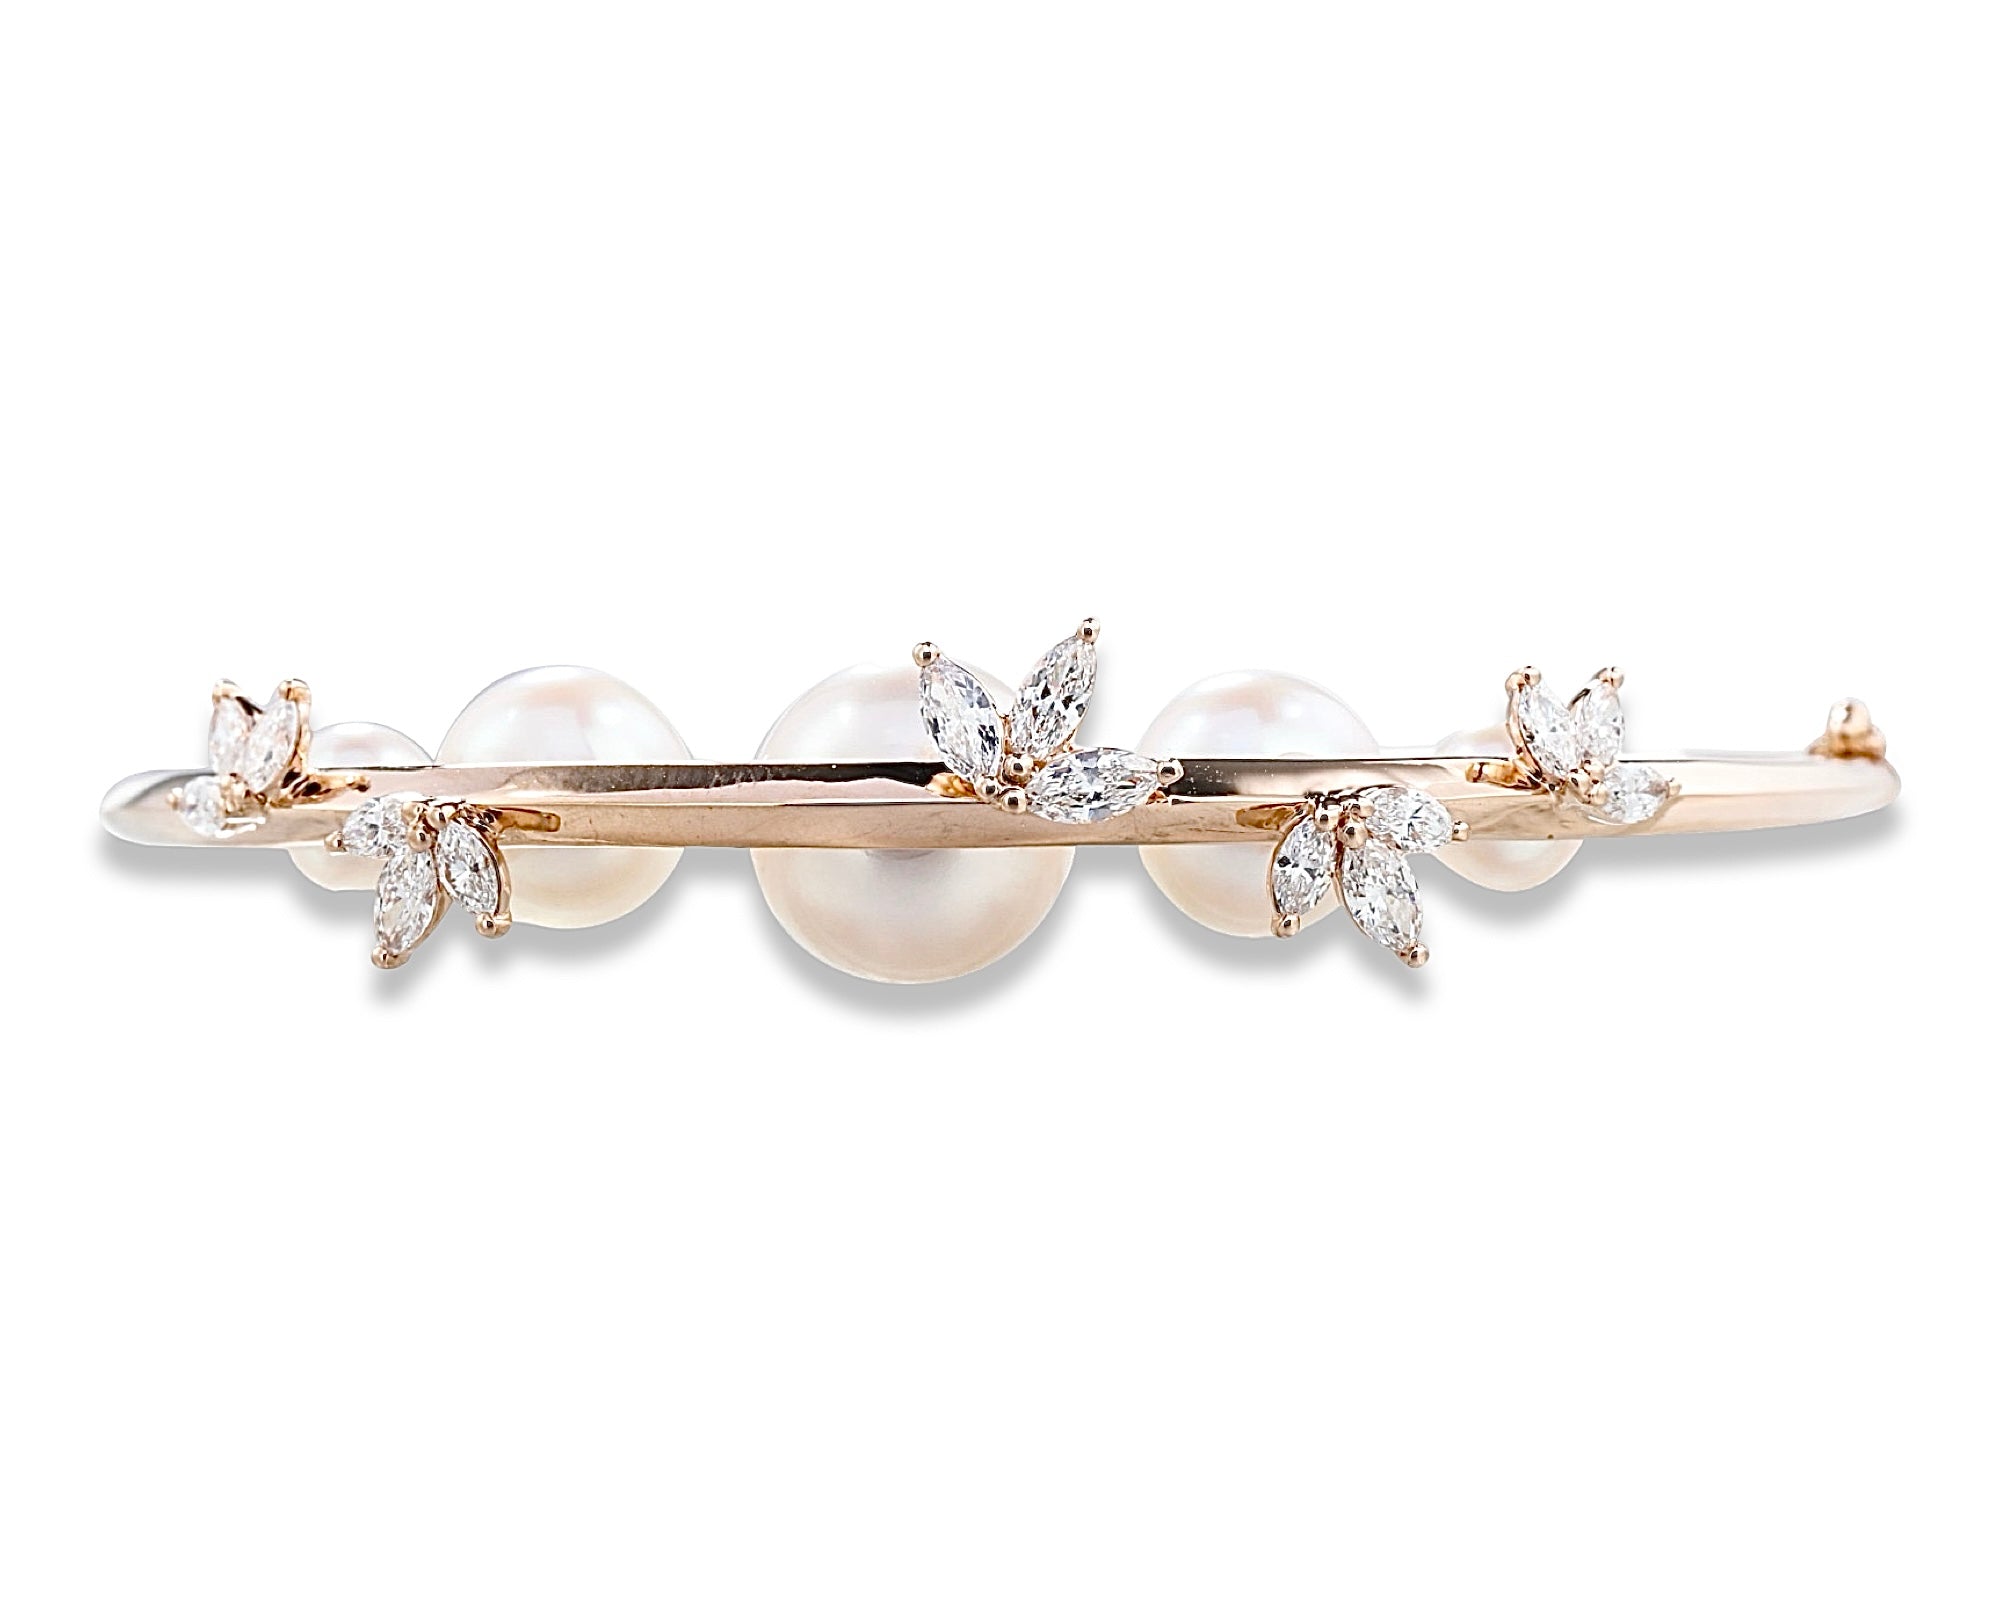 Pearl under the Lotus Bangle